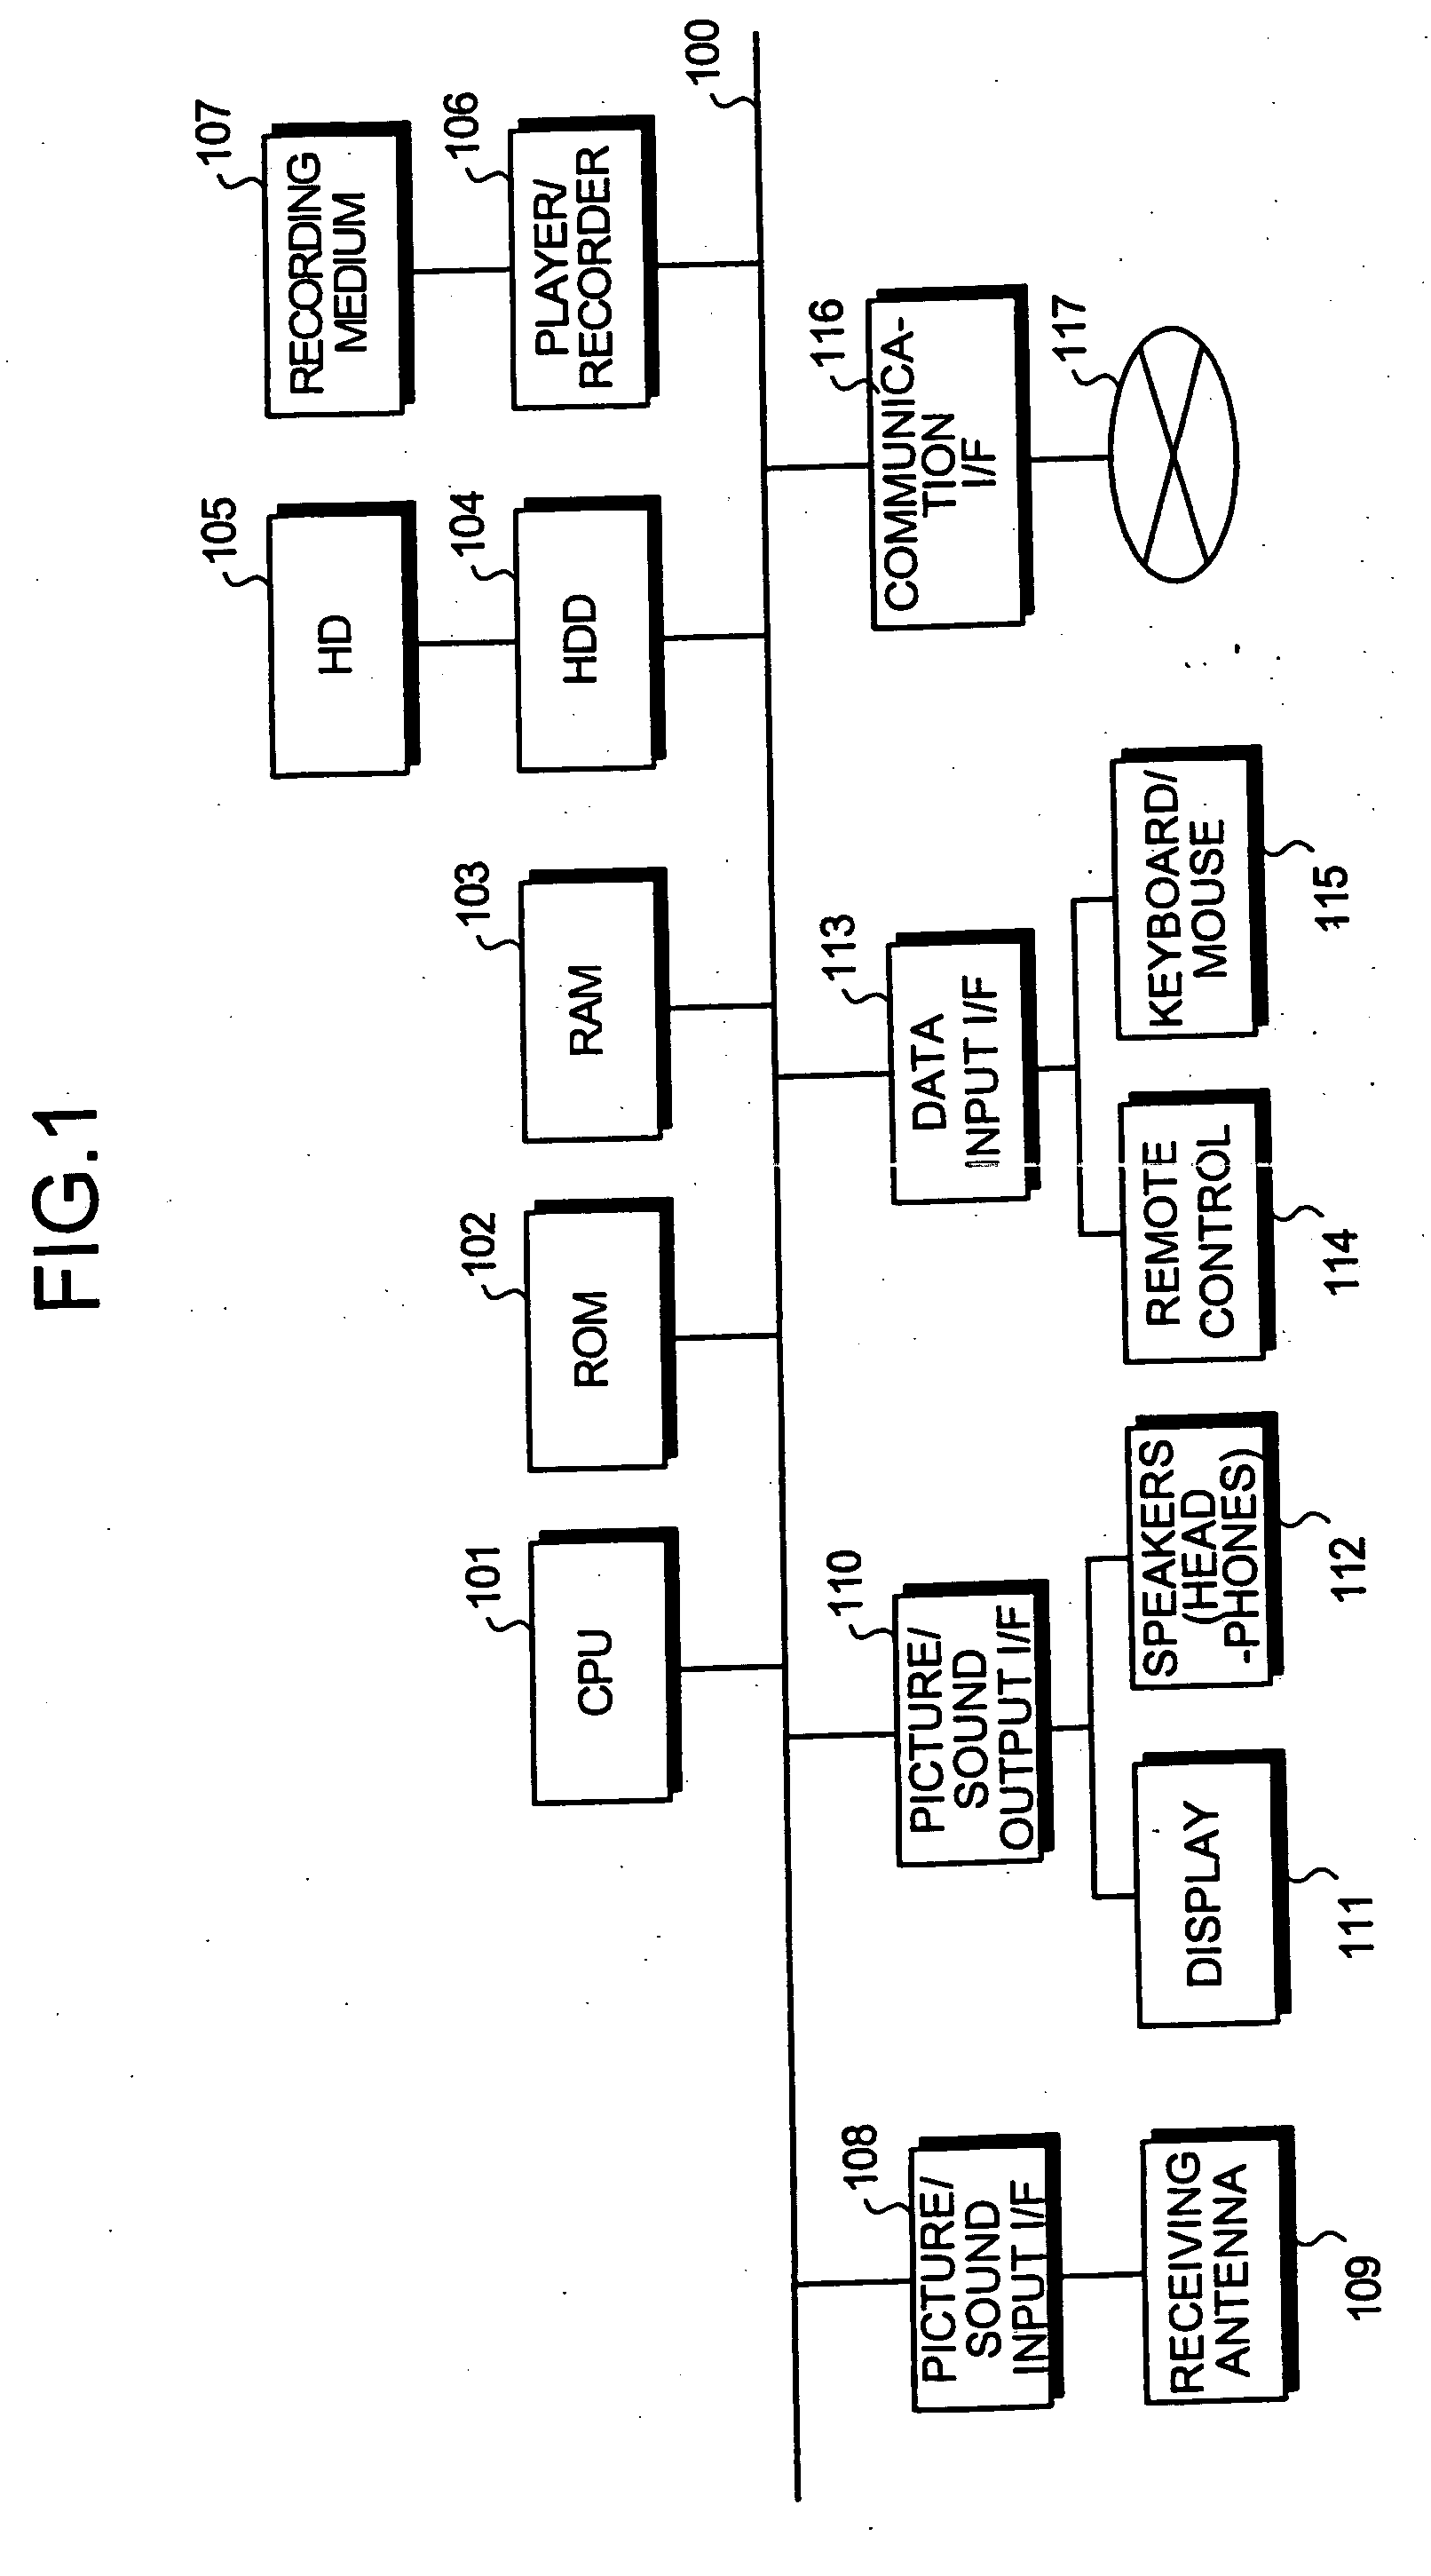 Apparatus, method, and computer product for recognizing video contents, and for video recording